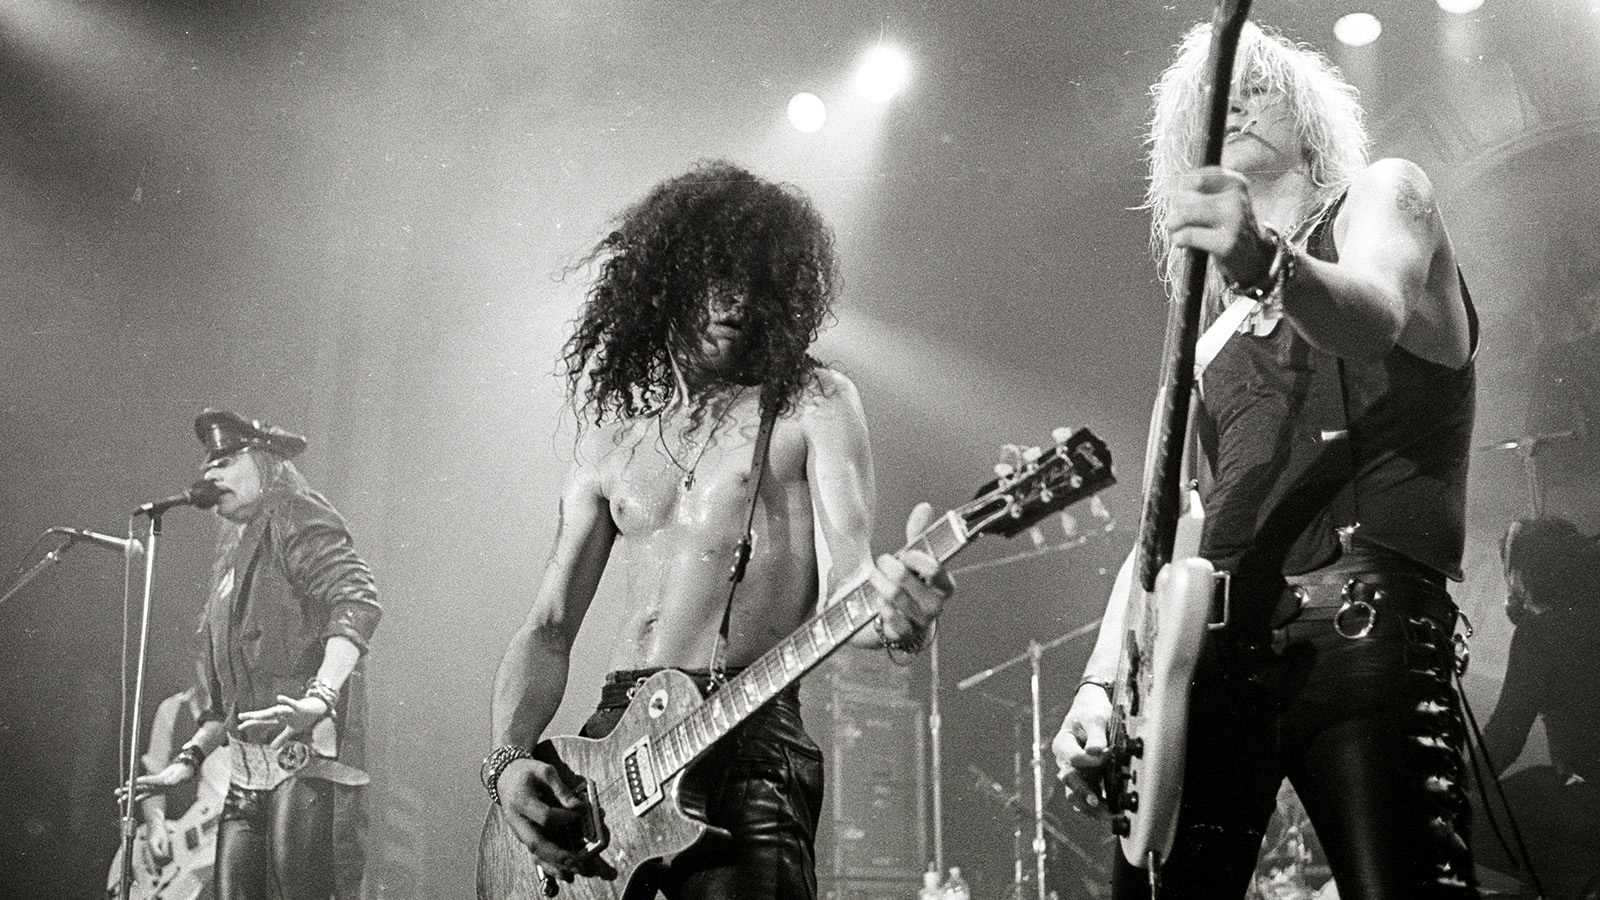 Guns N' Roses: The Life and Times of a Rock 'n' Roll Band